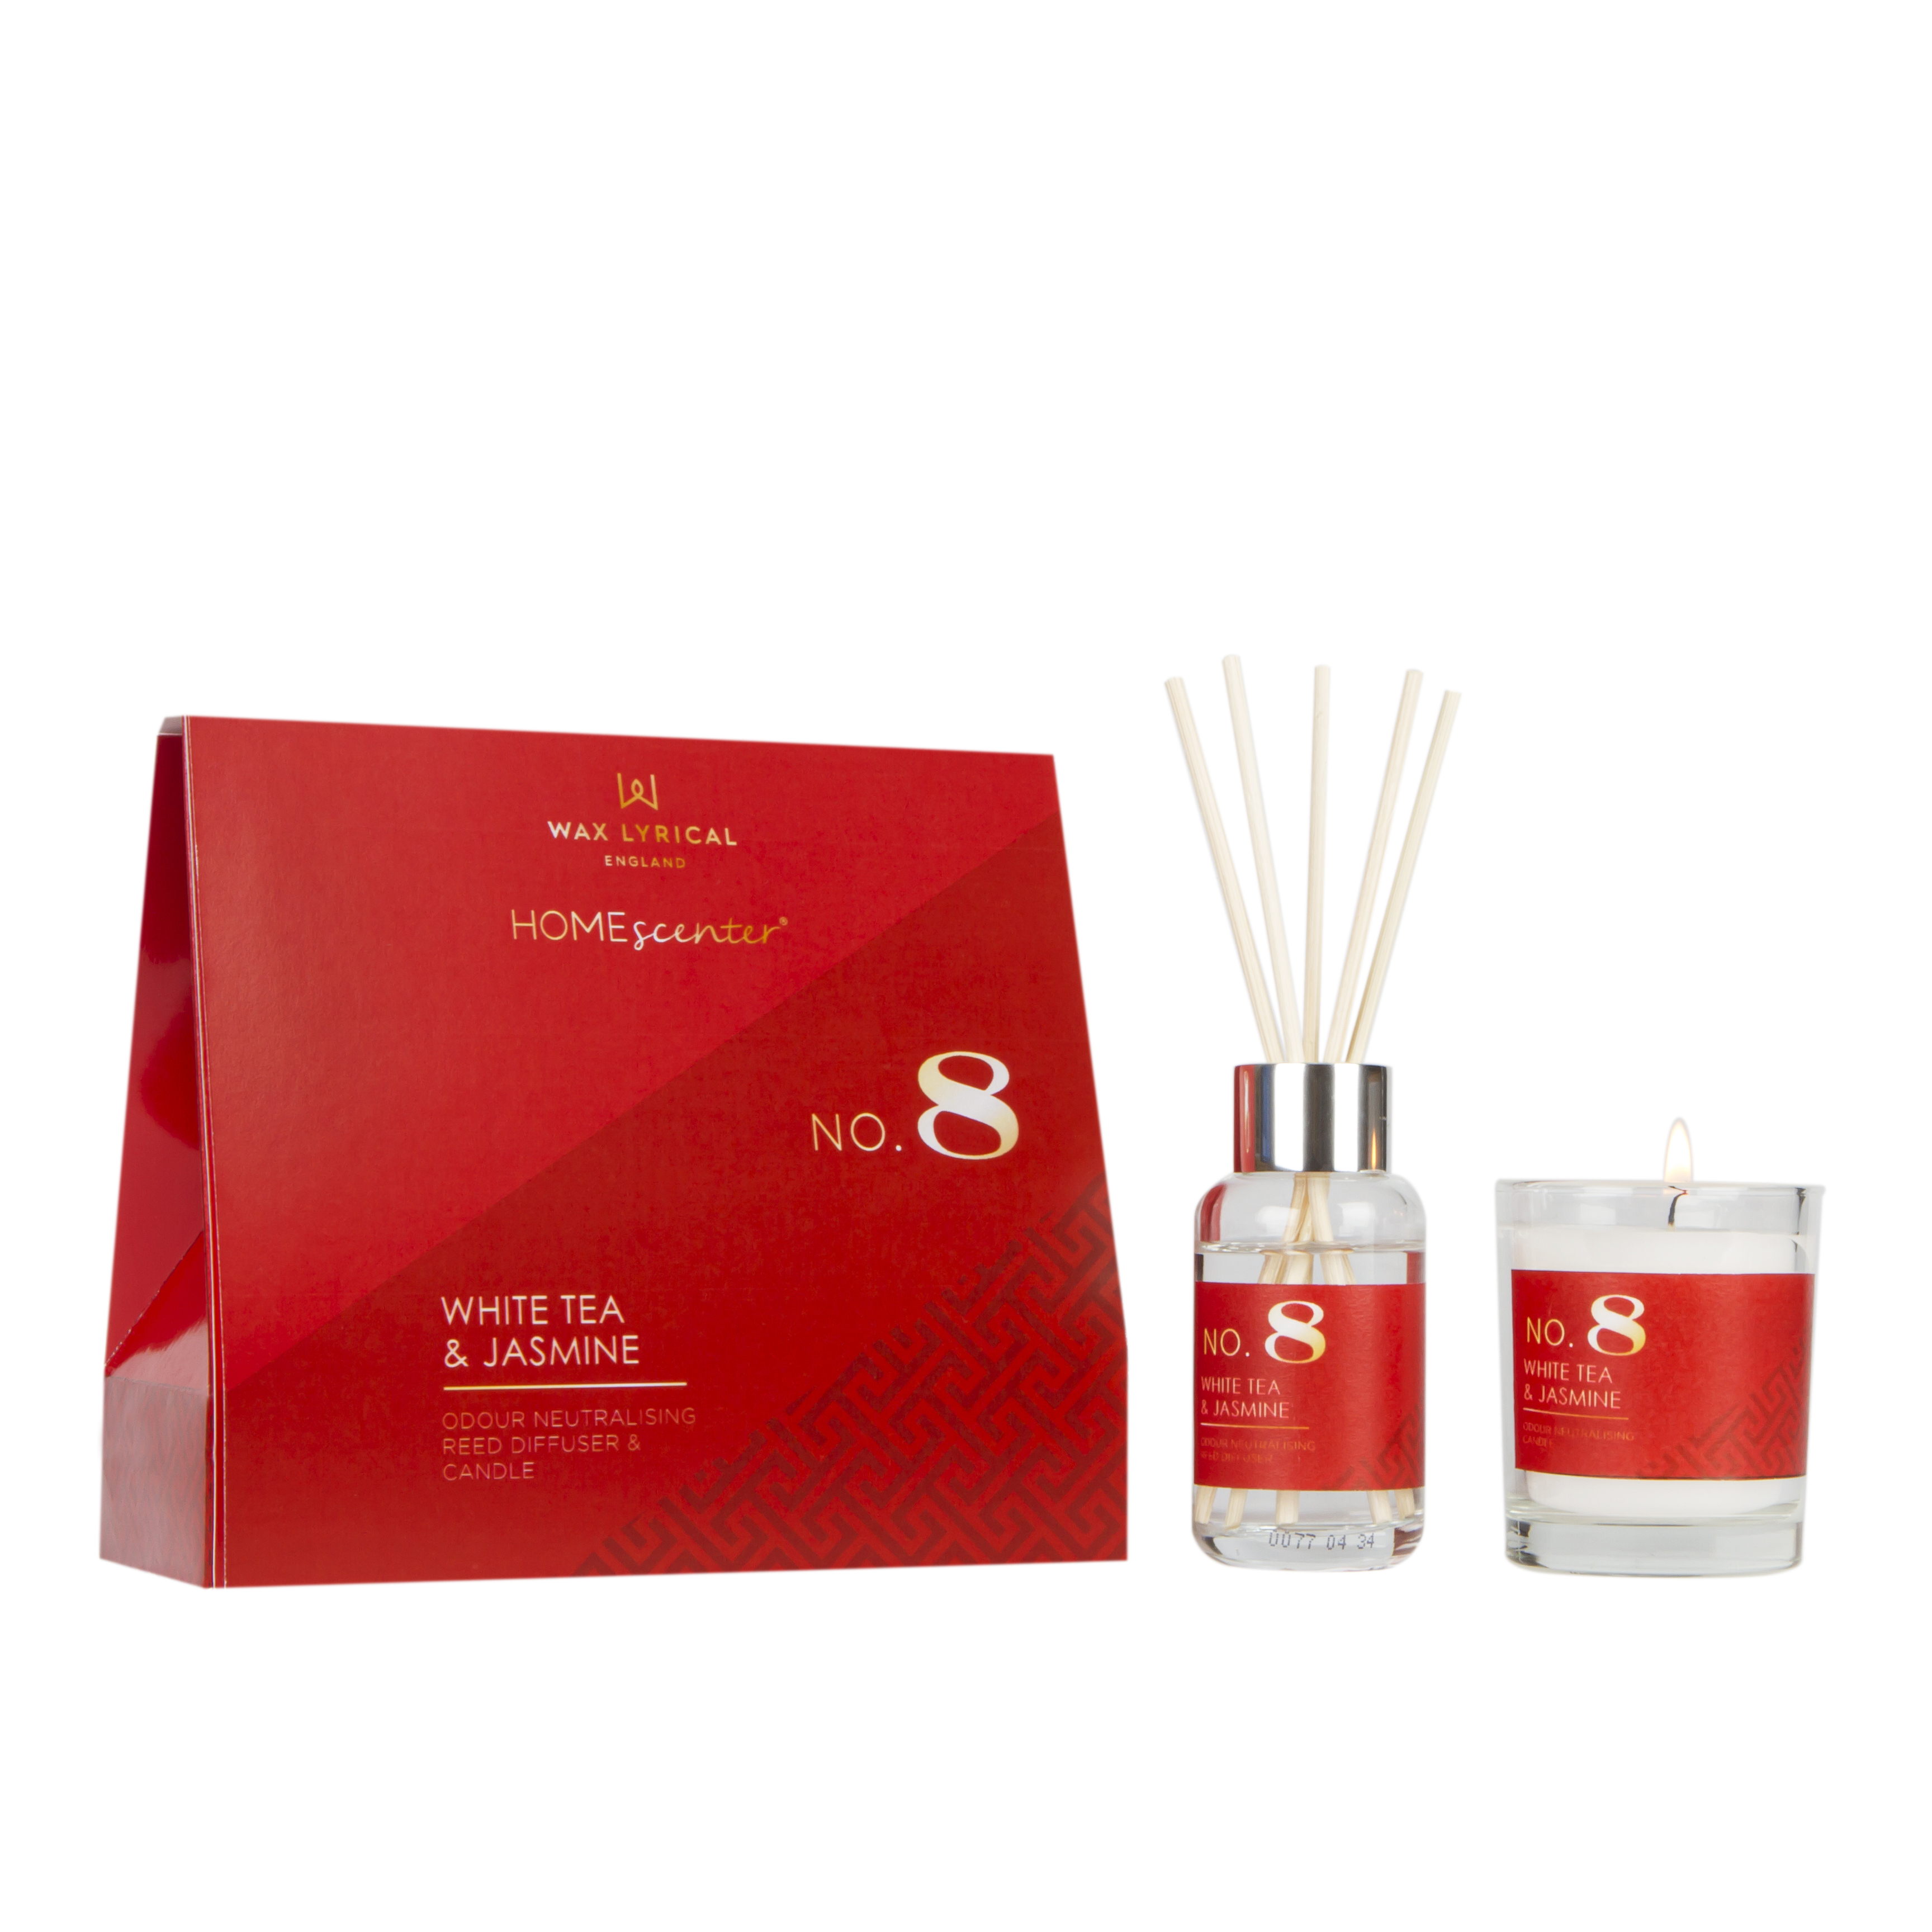 HomeScenter No. 8 White Tea and Jasmine Reed Diffuser and Candle Gift Set image number null